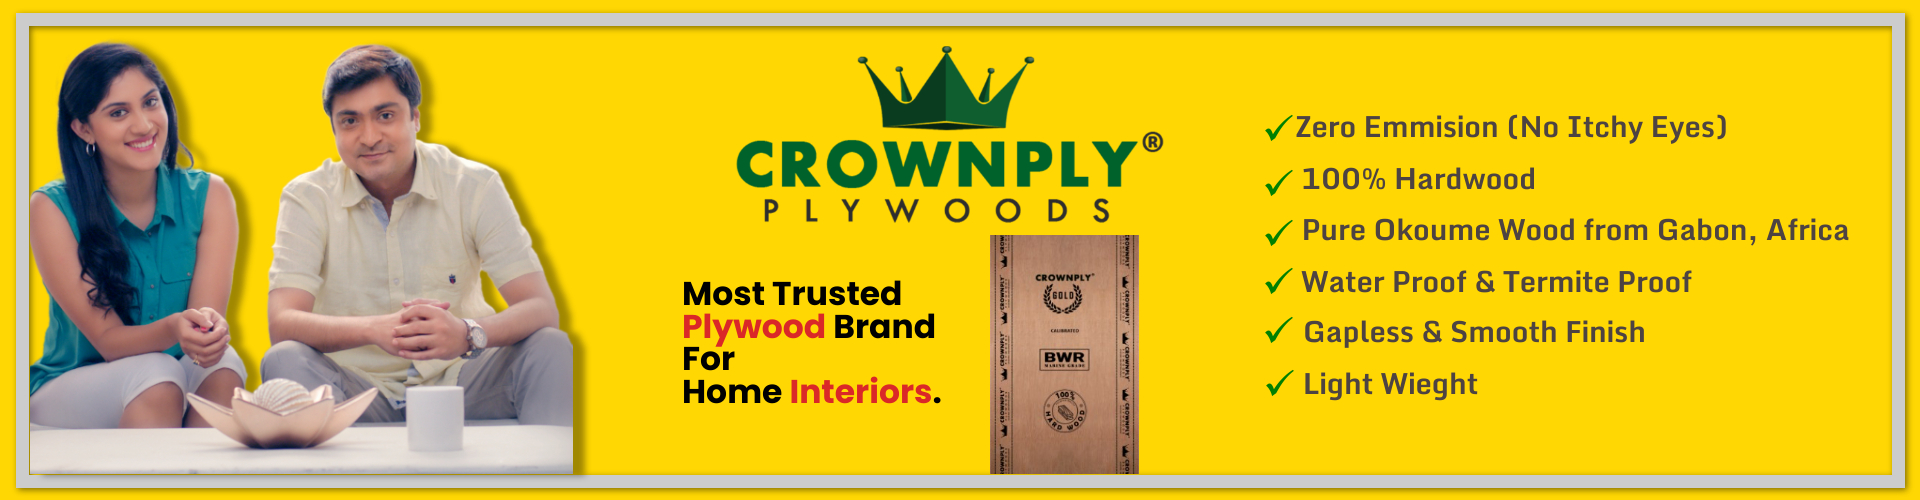 Crownply Gold Plywoods